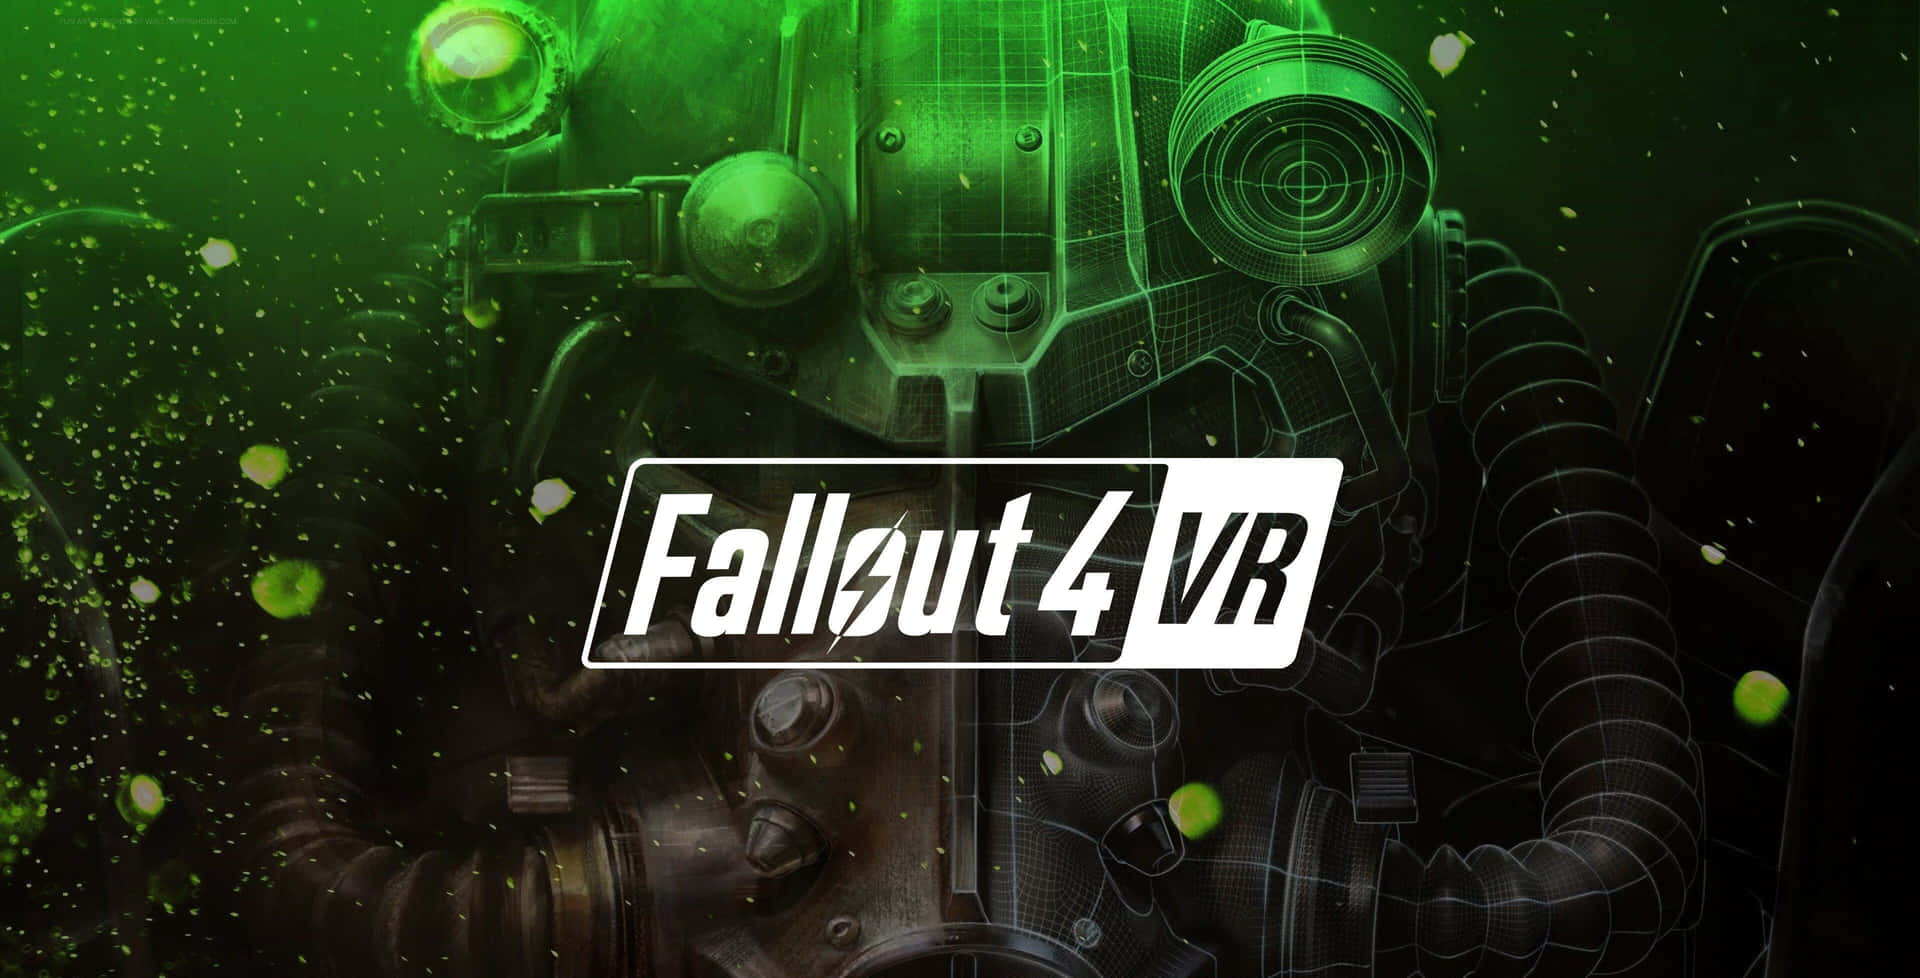 Fallout 4 Vr - A Green Background With The Words Fallout 4 Vr